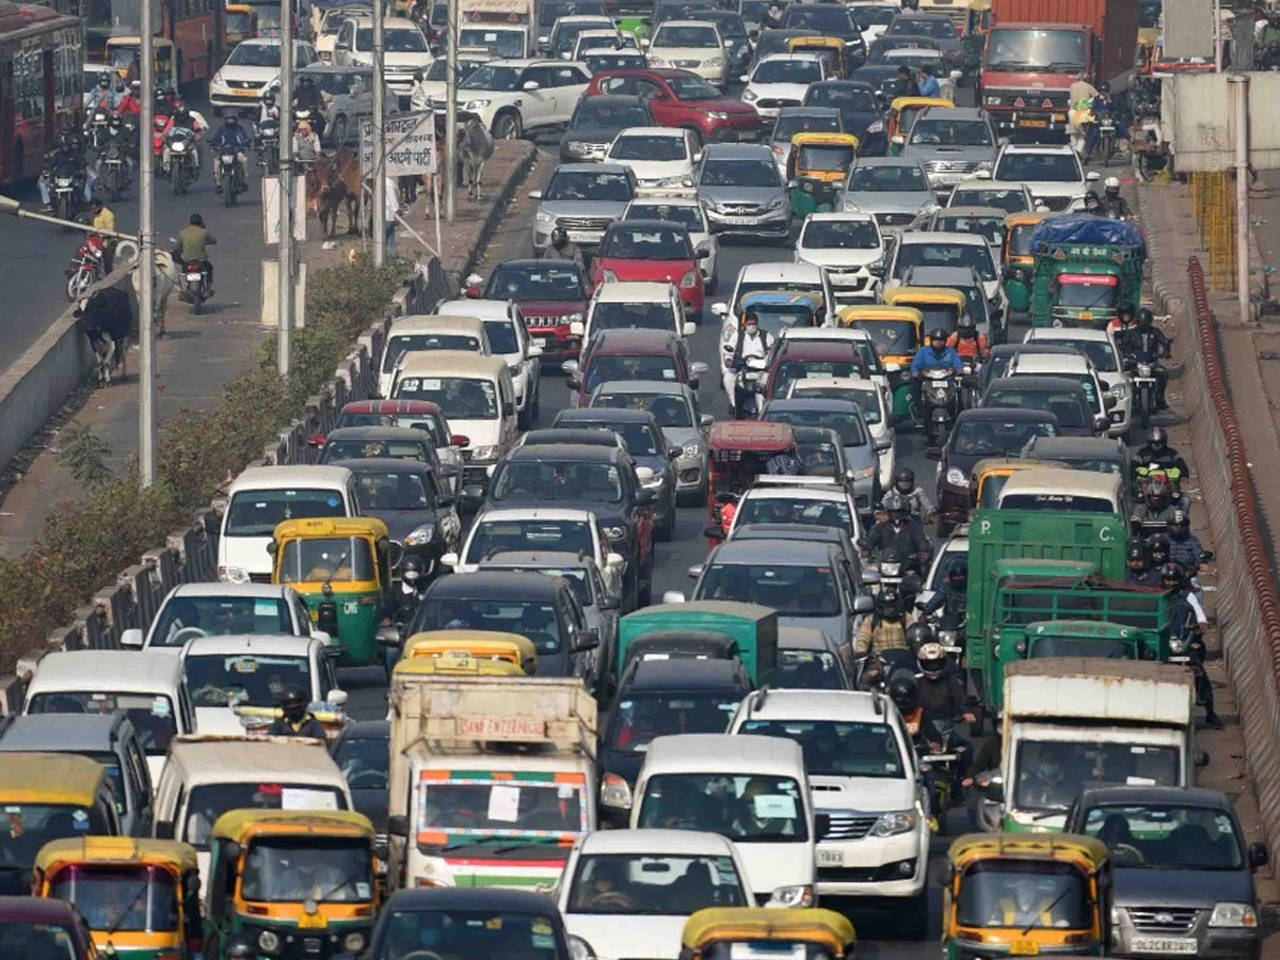 Global traffic congestion ranking has 3 Indian cities in top 10 India News image photo